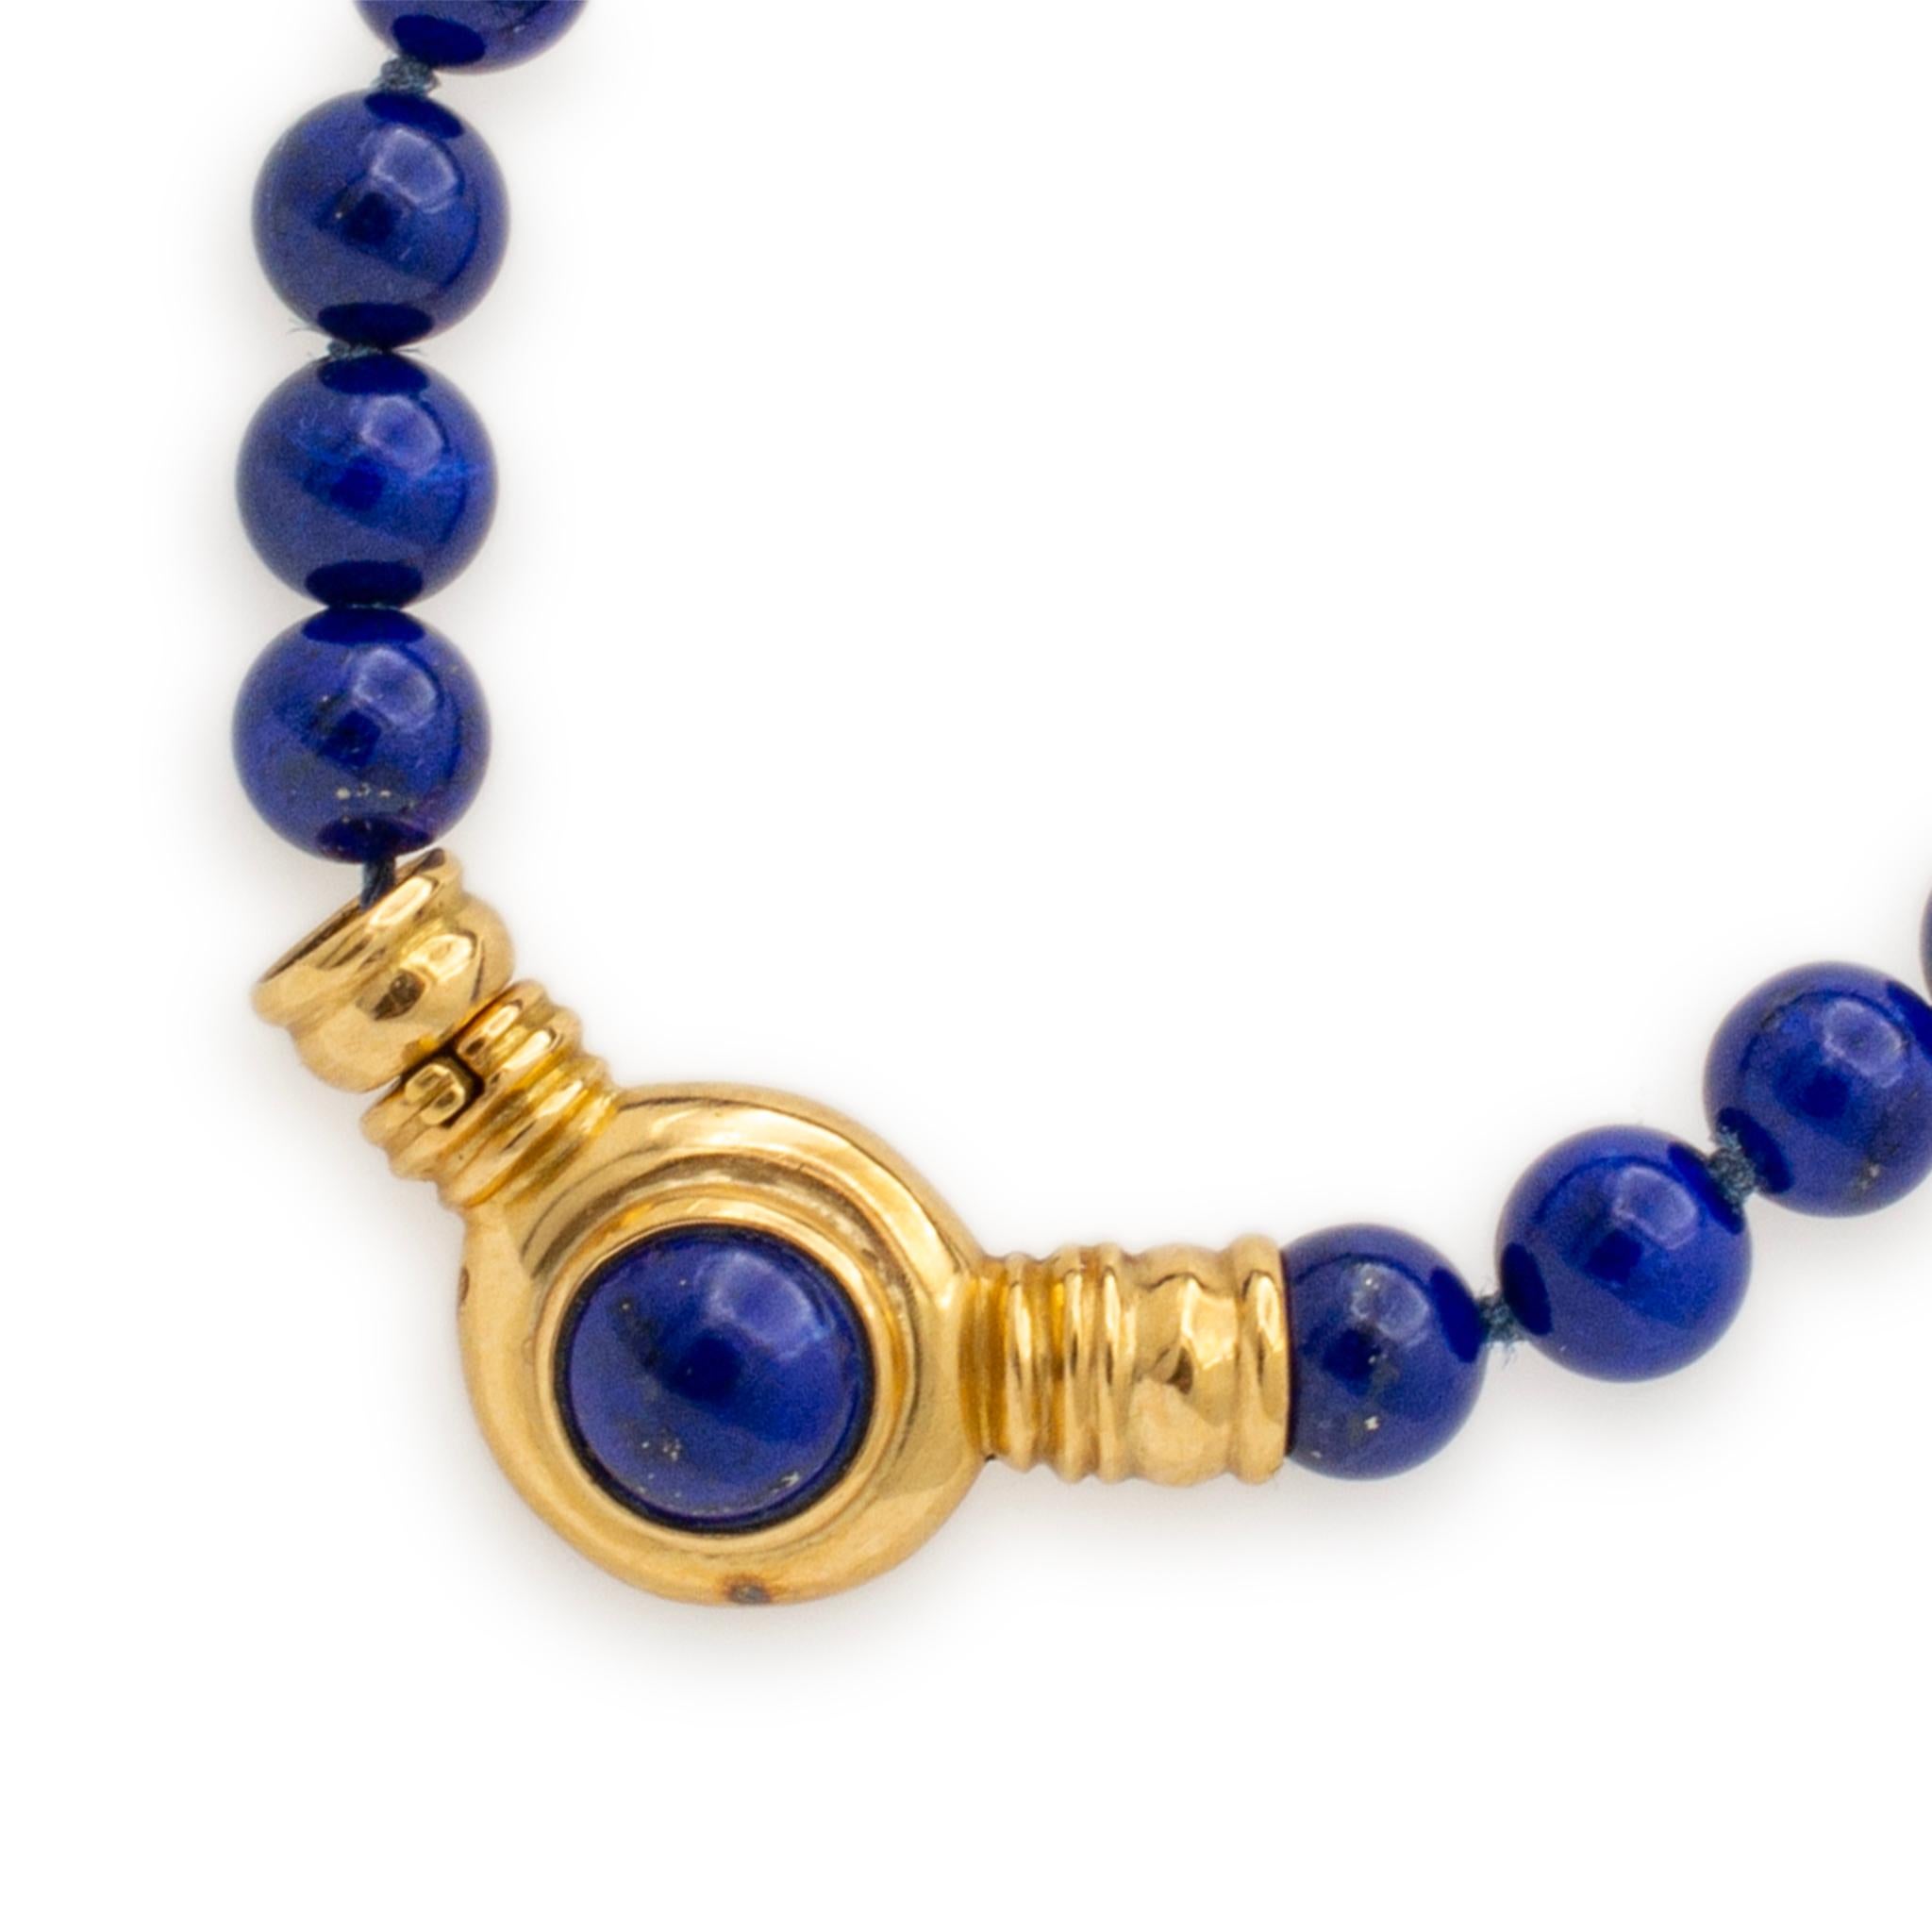 Gender: Ladies

Metal Type: 18K Yellow Gold

Length: 17.00 inches

Weight: 27.40 grams

Ladies 18K yellow gold collar lapis lazuli bead necklace. Engraved with 